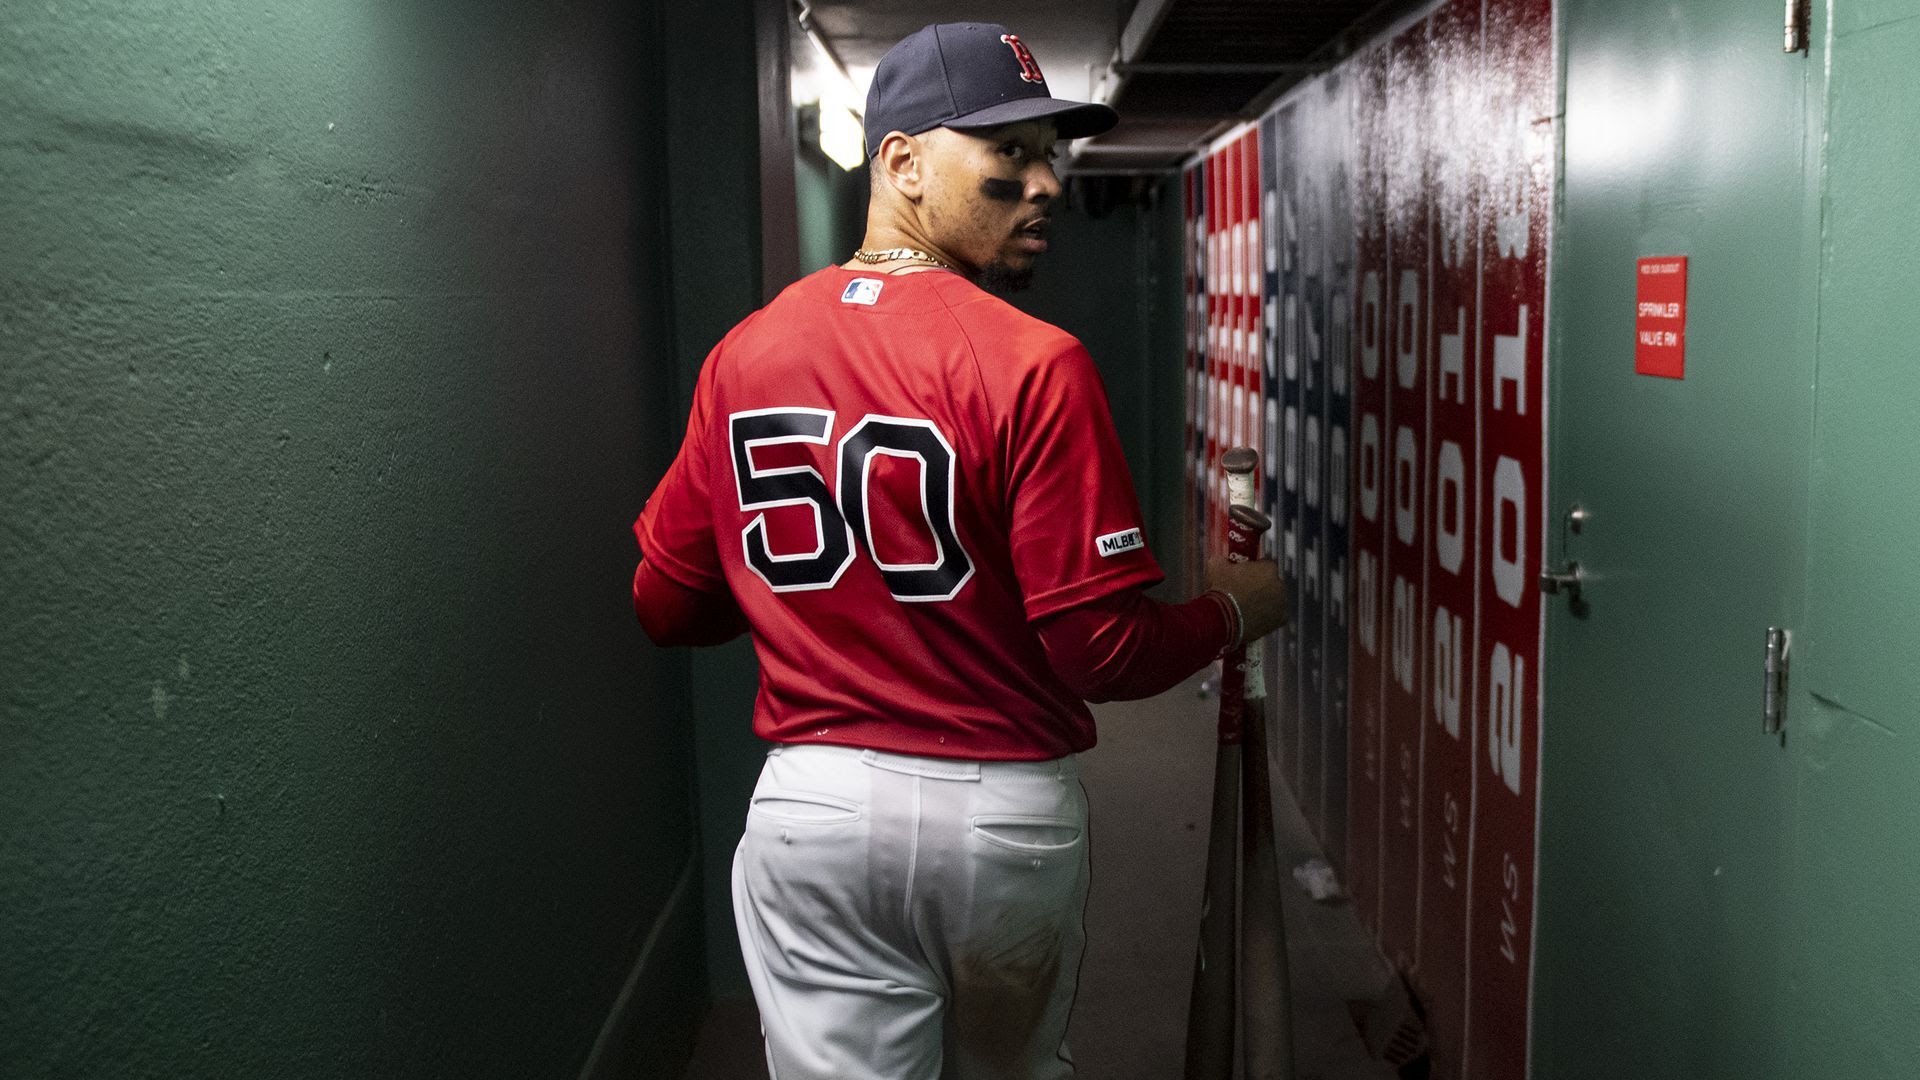 mookie betts wallpaper red sox